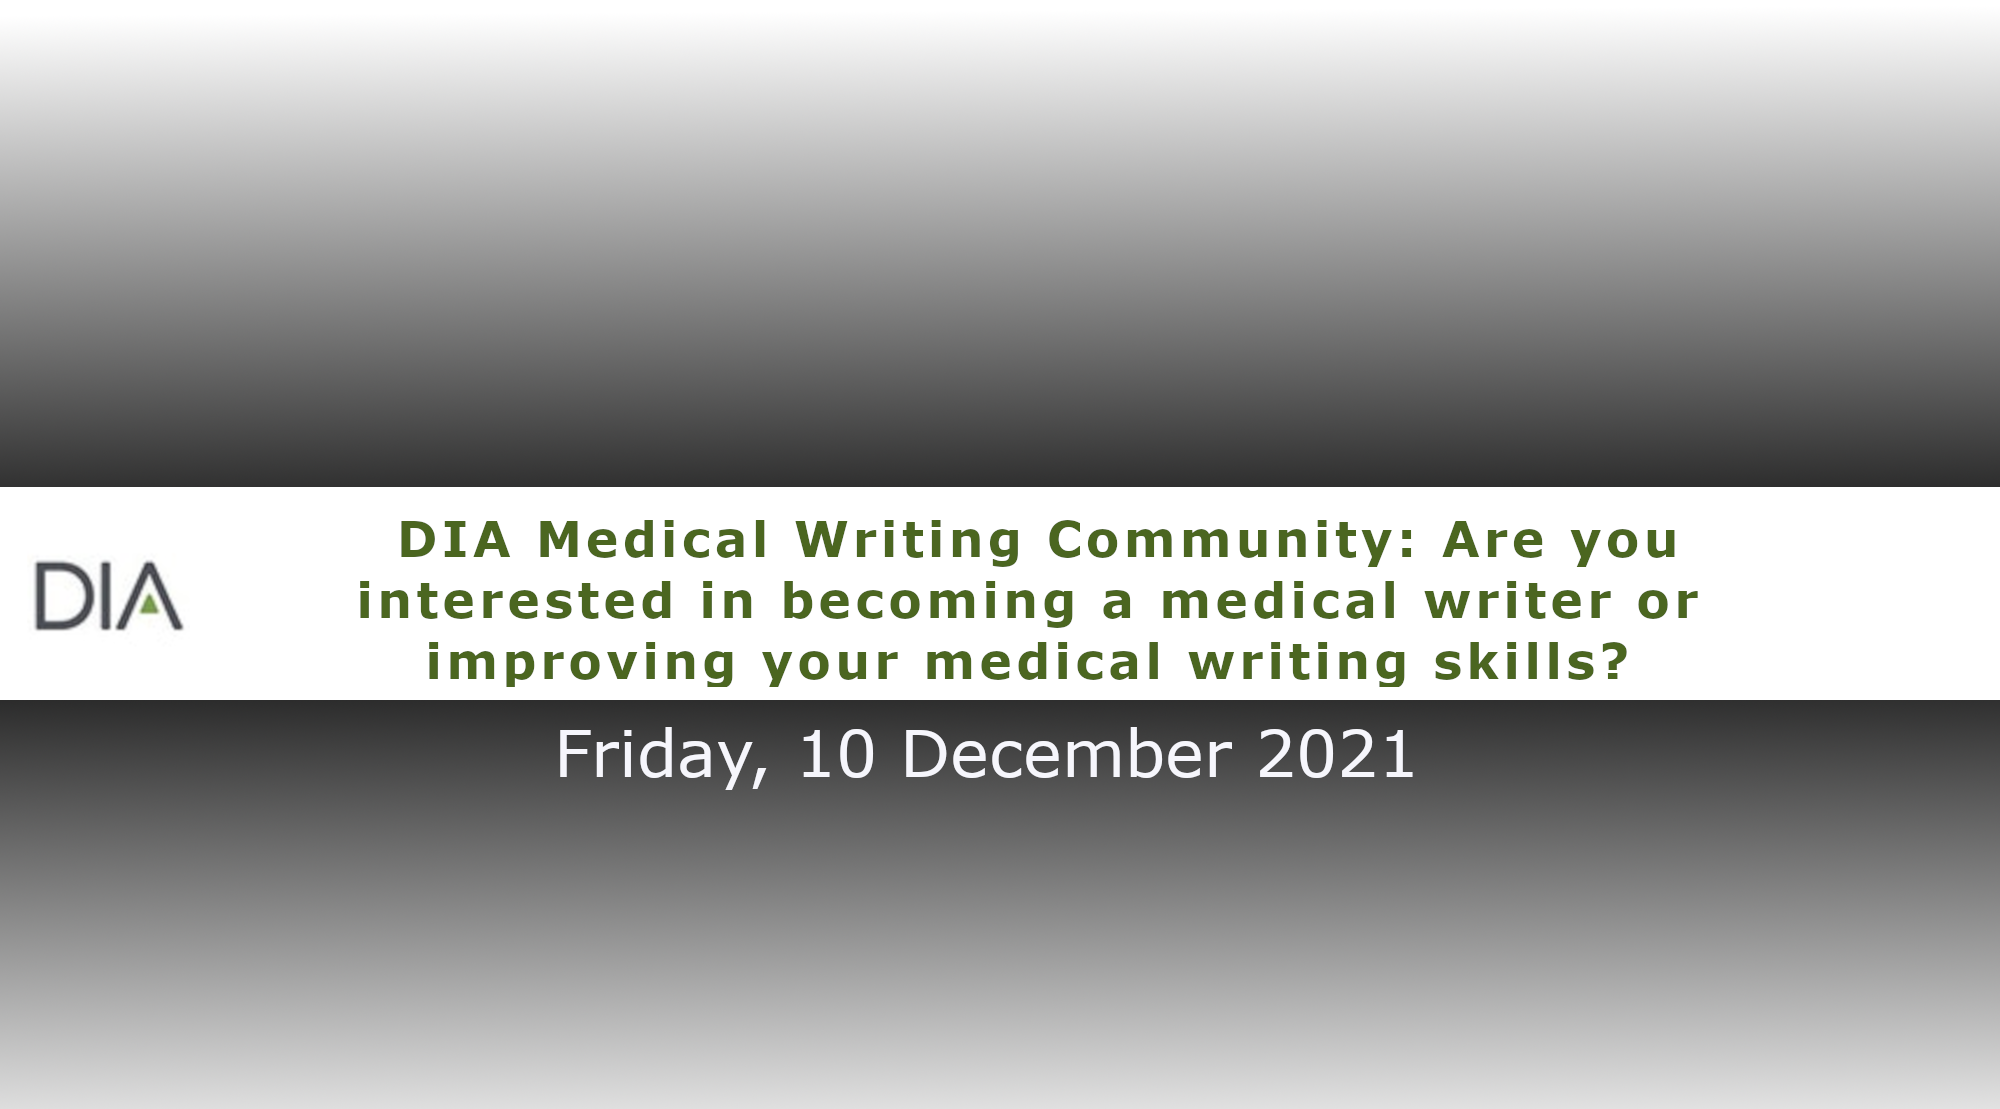 DIA Medical Writing Community: Are you interested in becoming a medical writer or improving your medical writing skills?